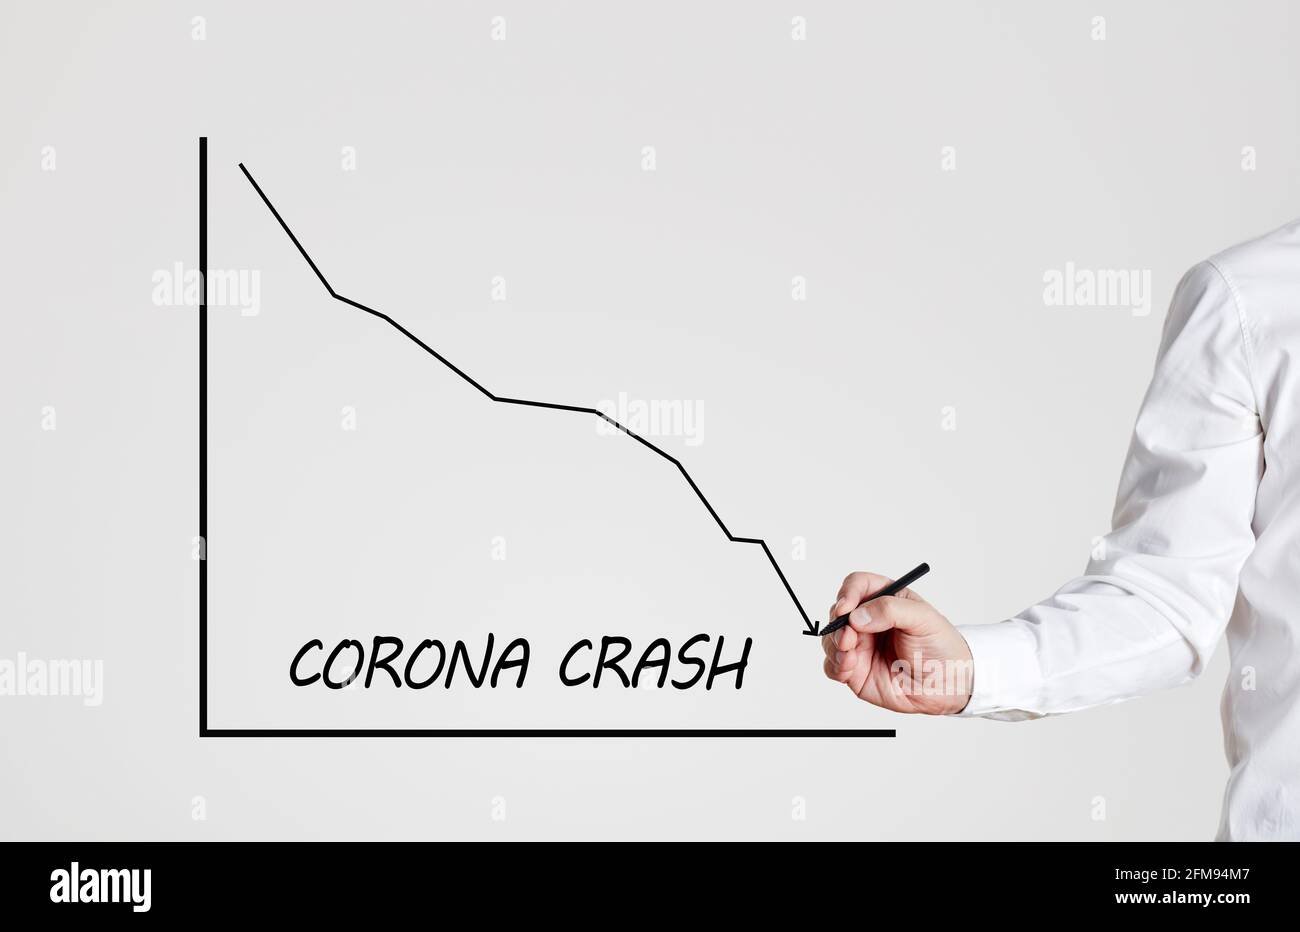 Businessman draws a declining line graph with the word corona crash. Negative financial impact of coronavirus pandemic on economy and business. Stock Photo